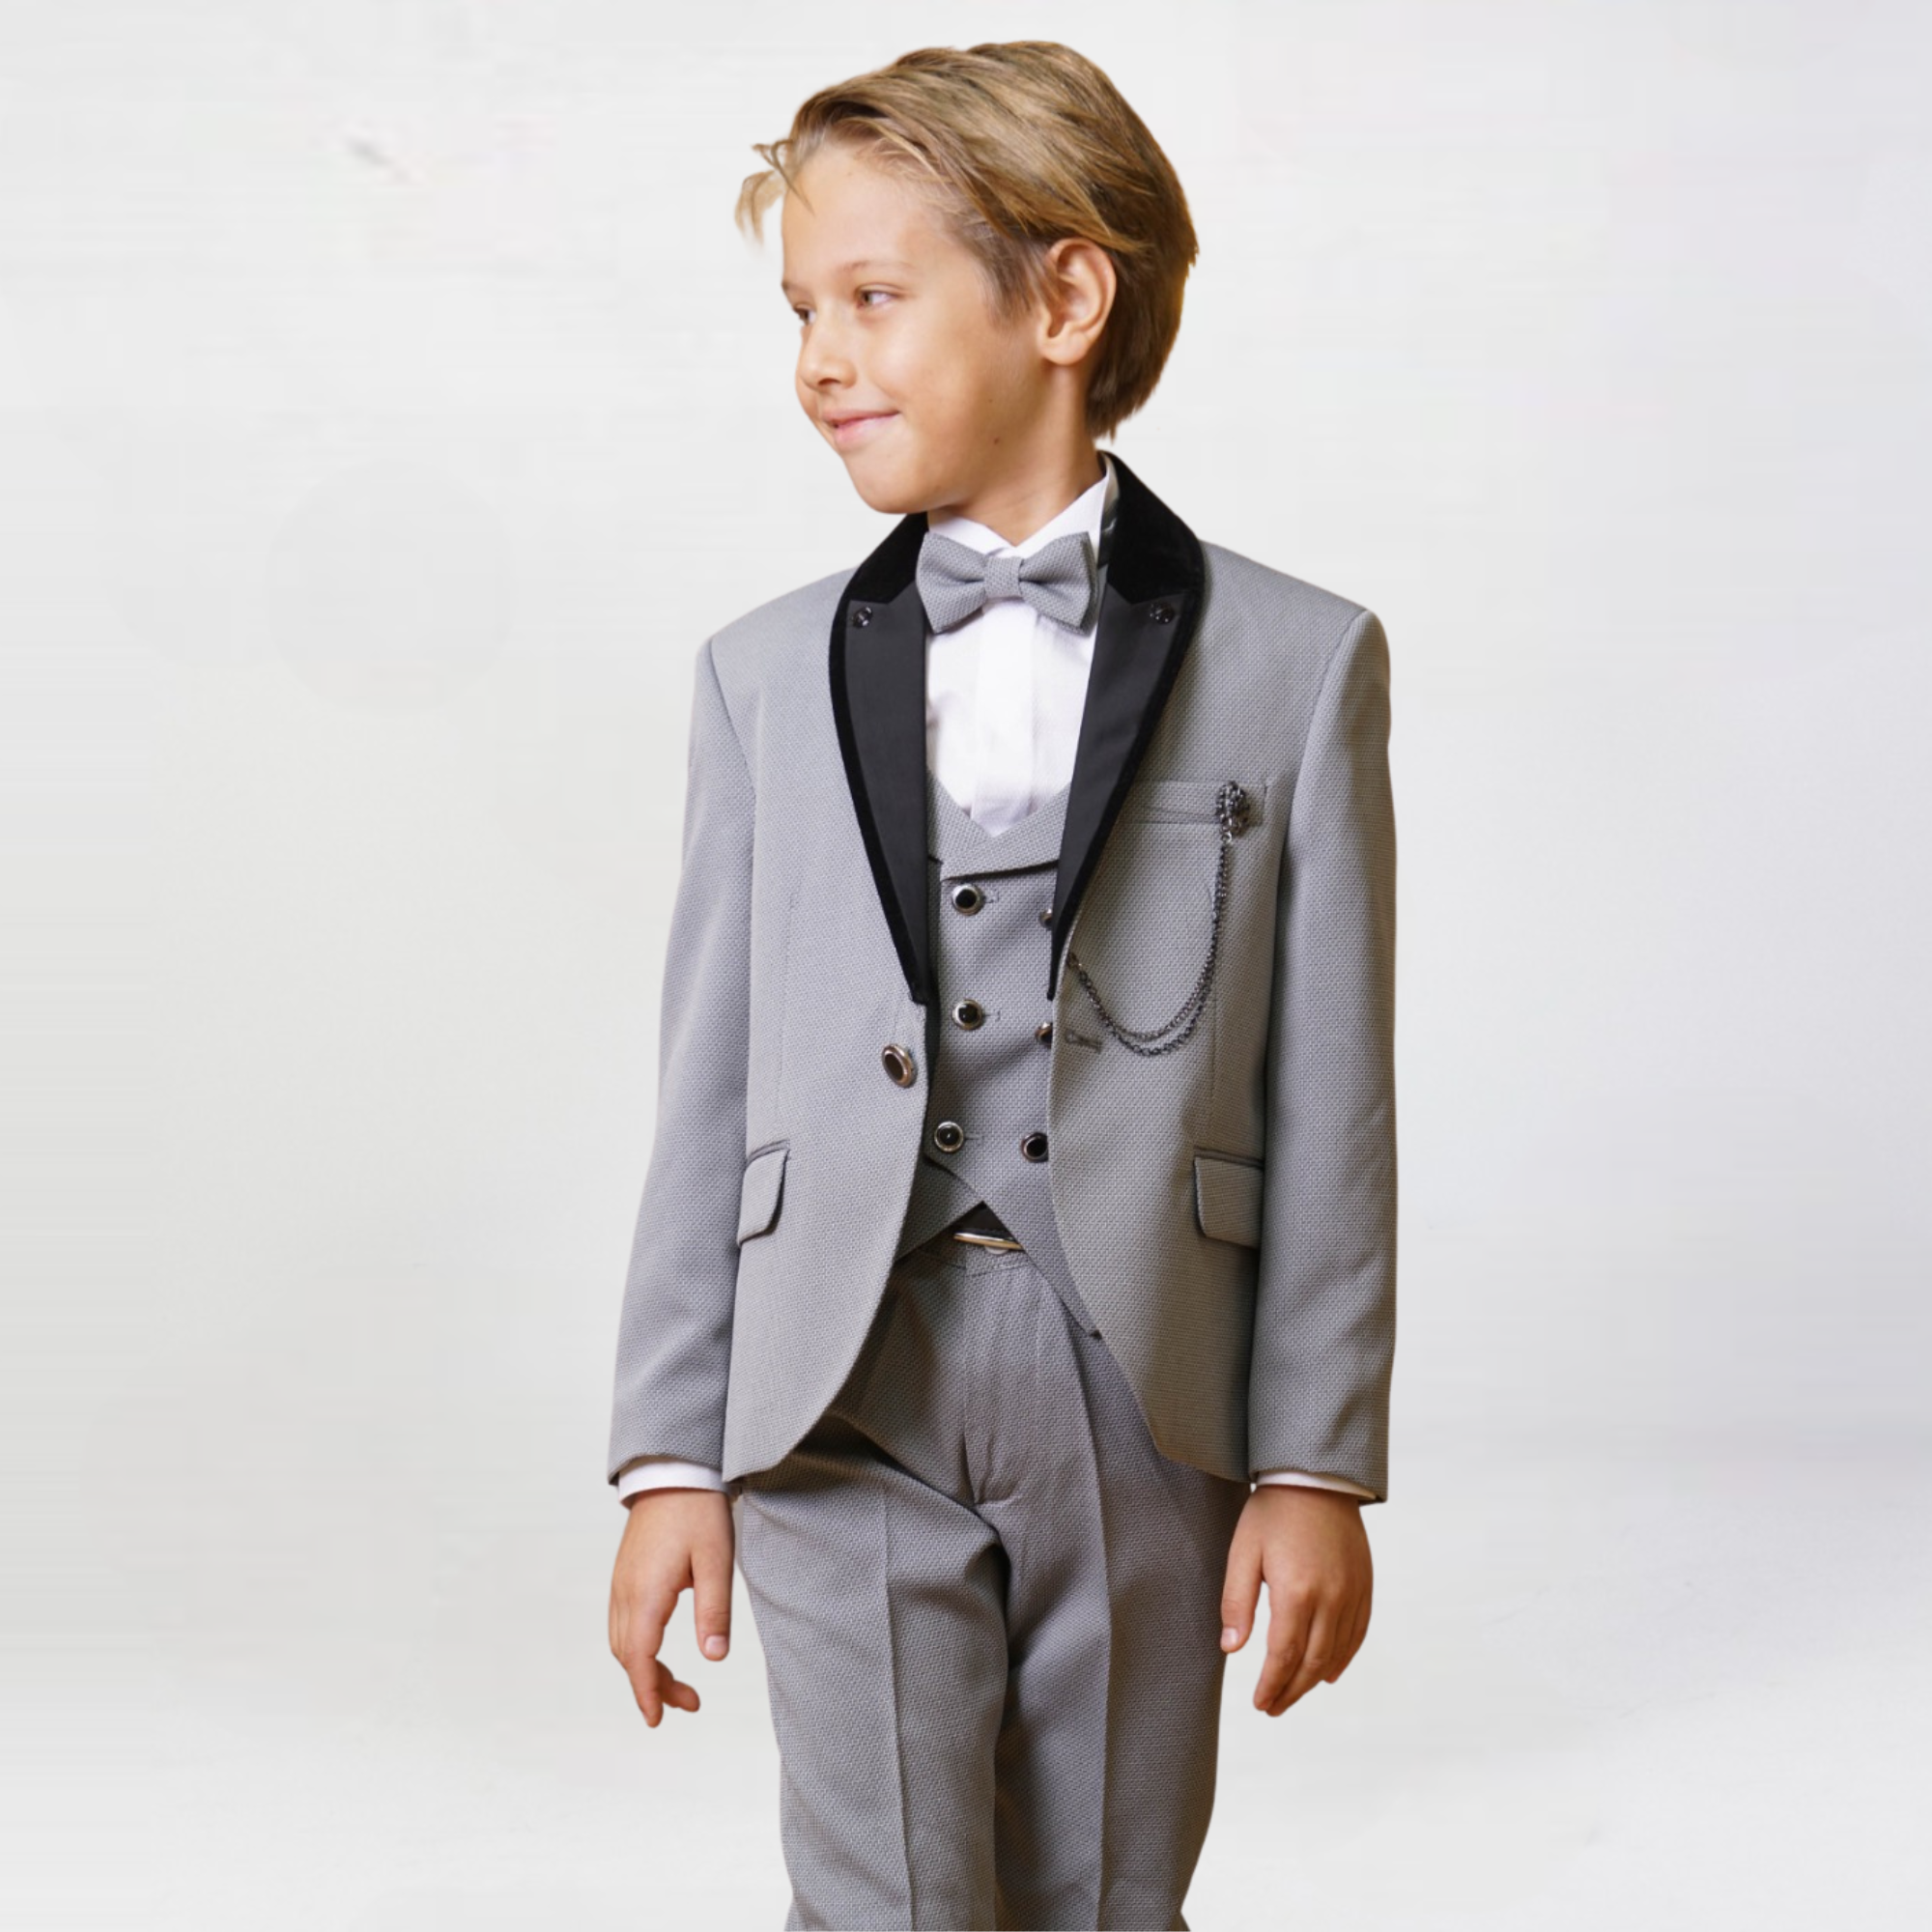 Majestic Max Formal Boys Suit